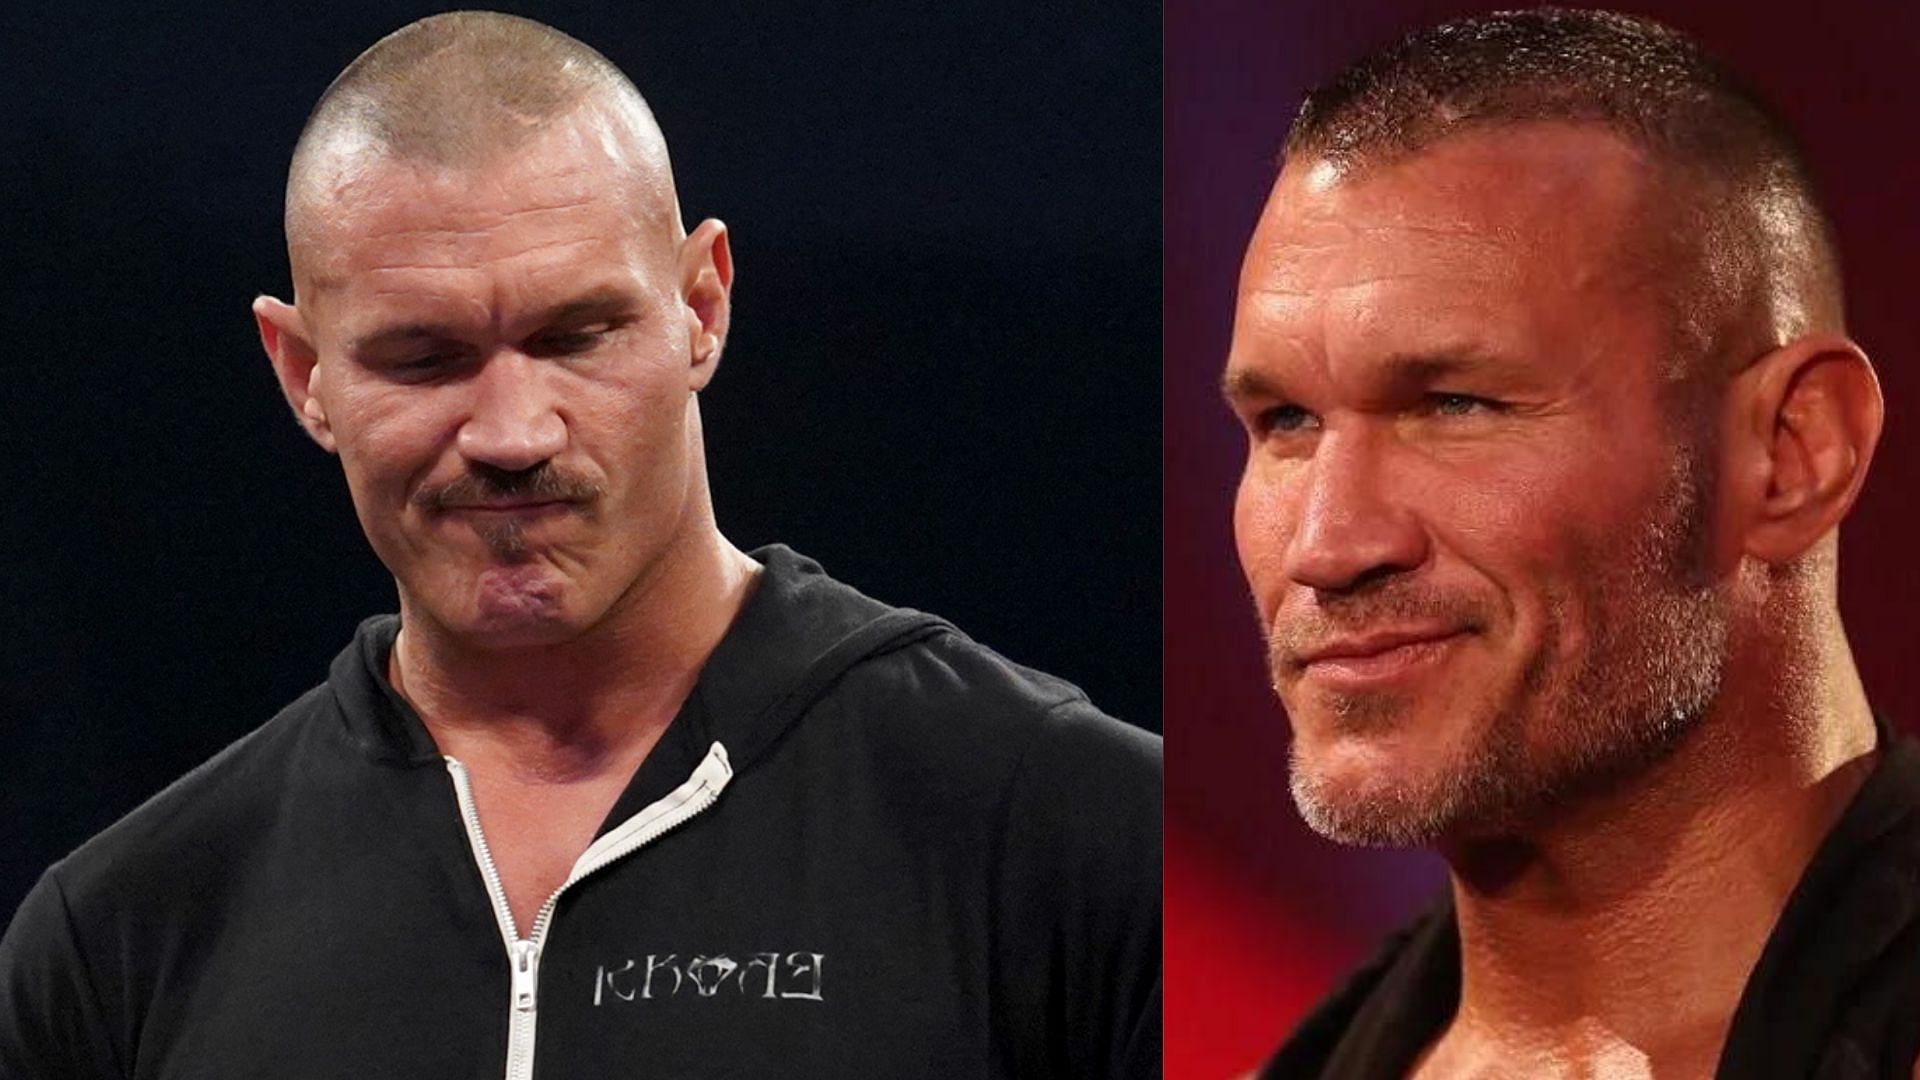 Randy Orton is currently sidelined with an injury.